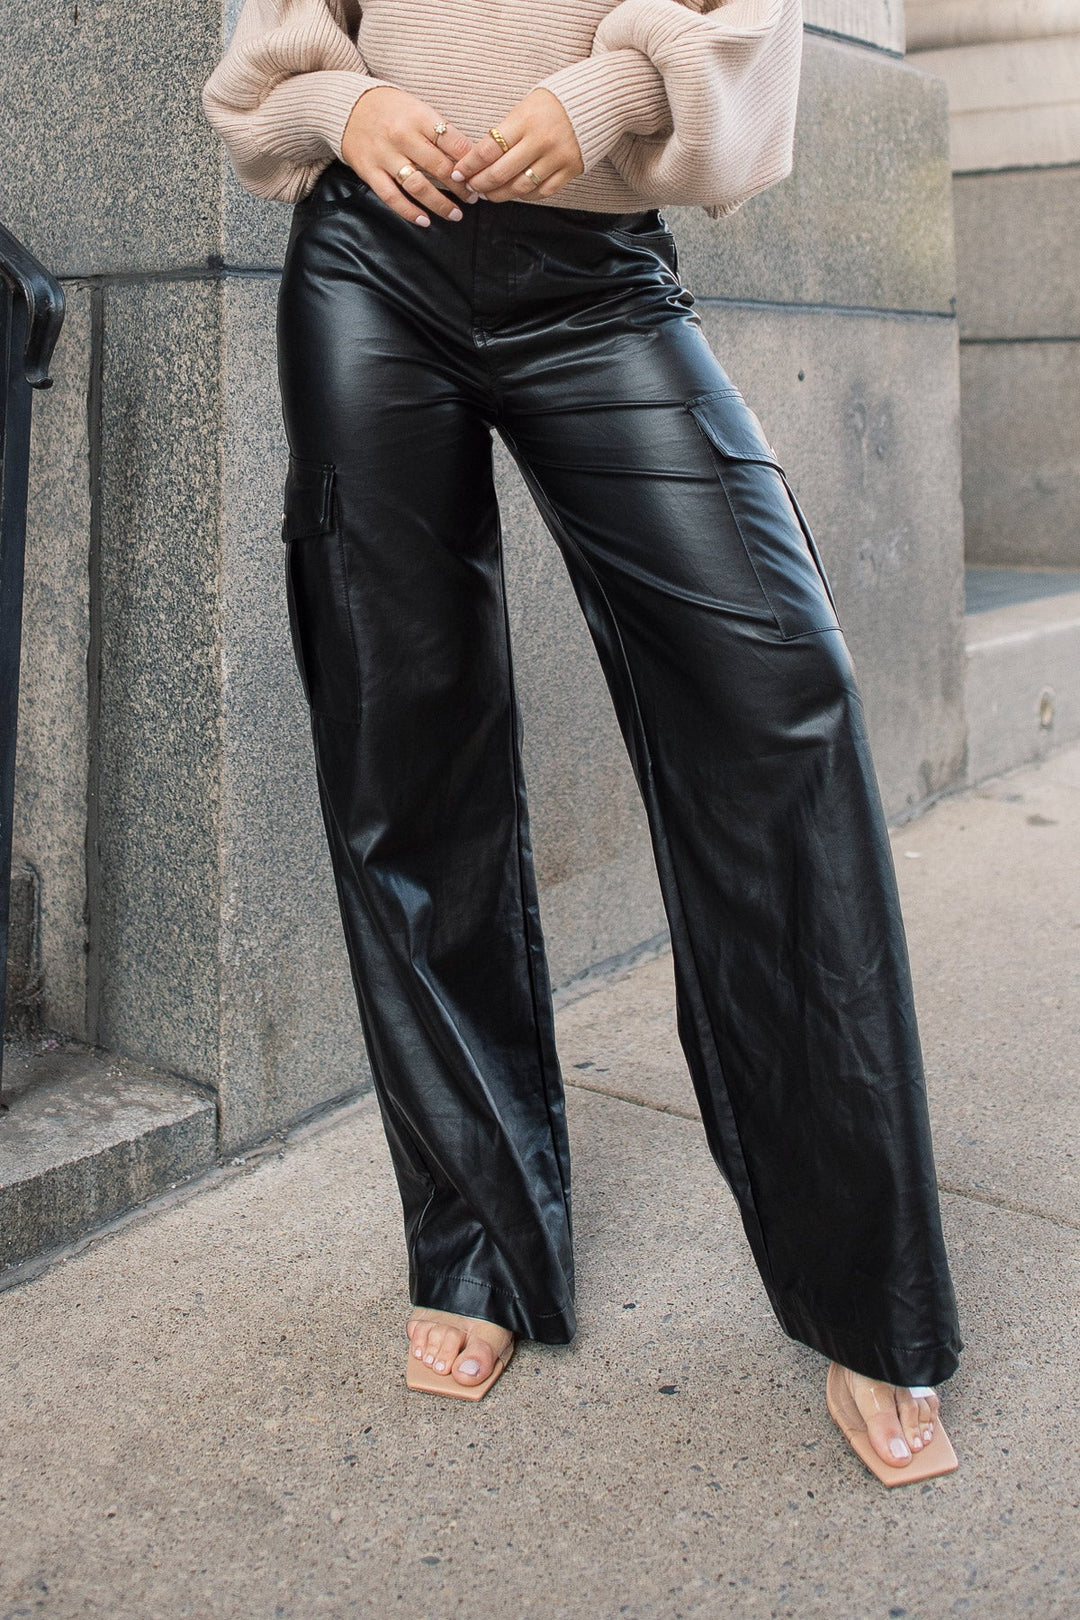 Trendy Girl Black Faux Leather Pants: Transition from Day to Night